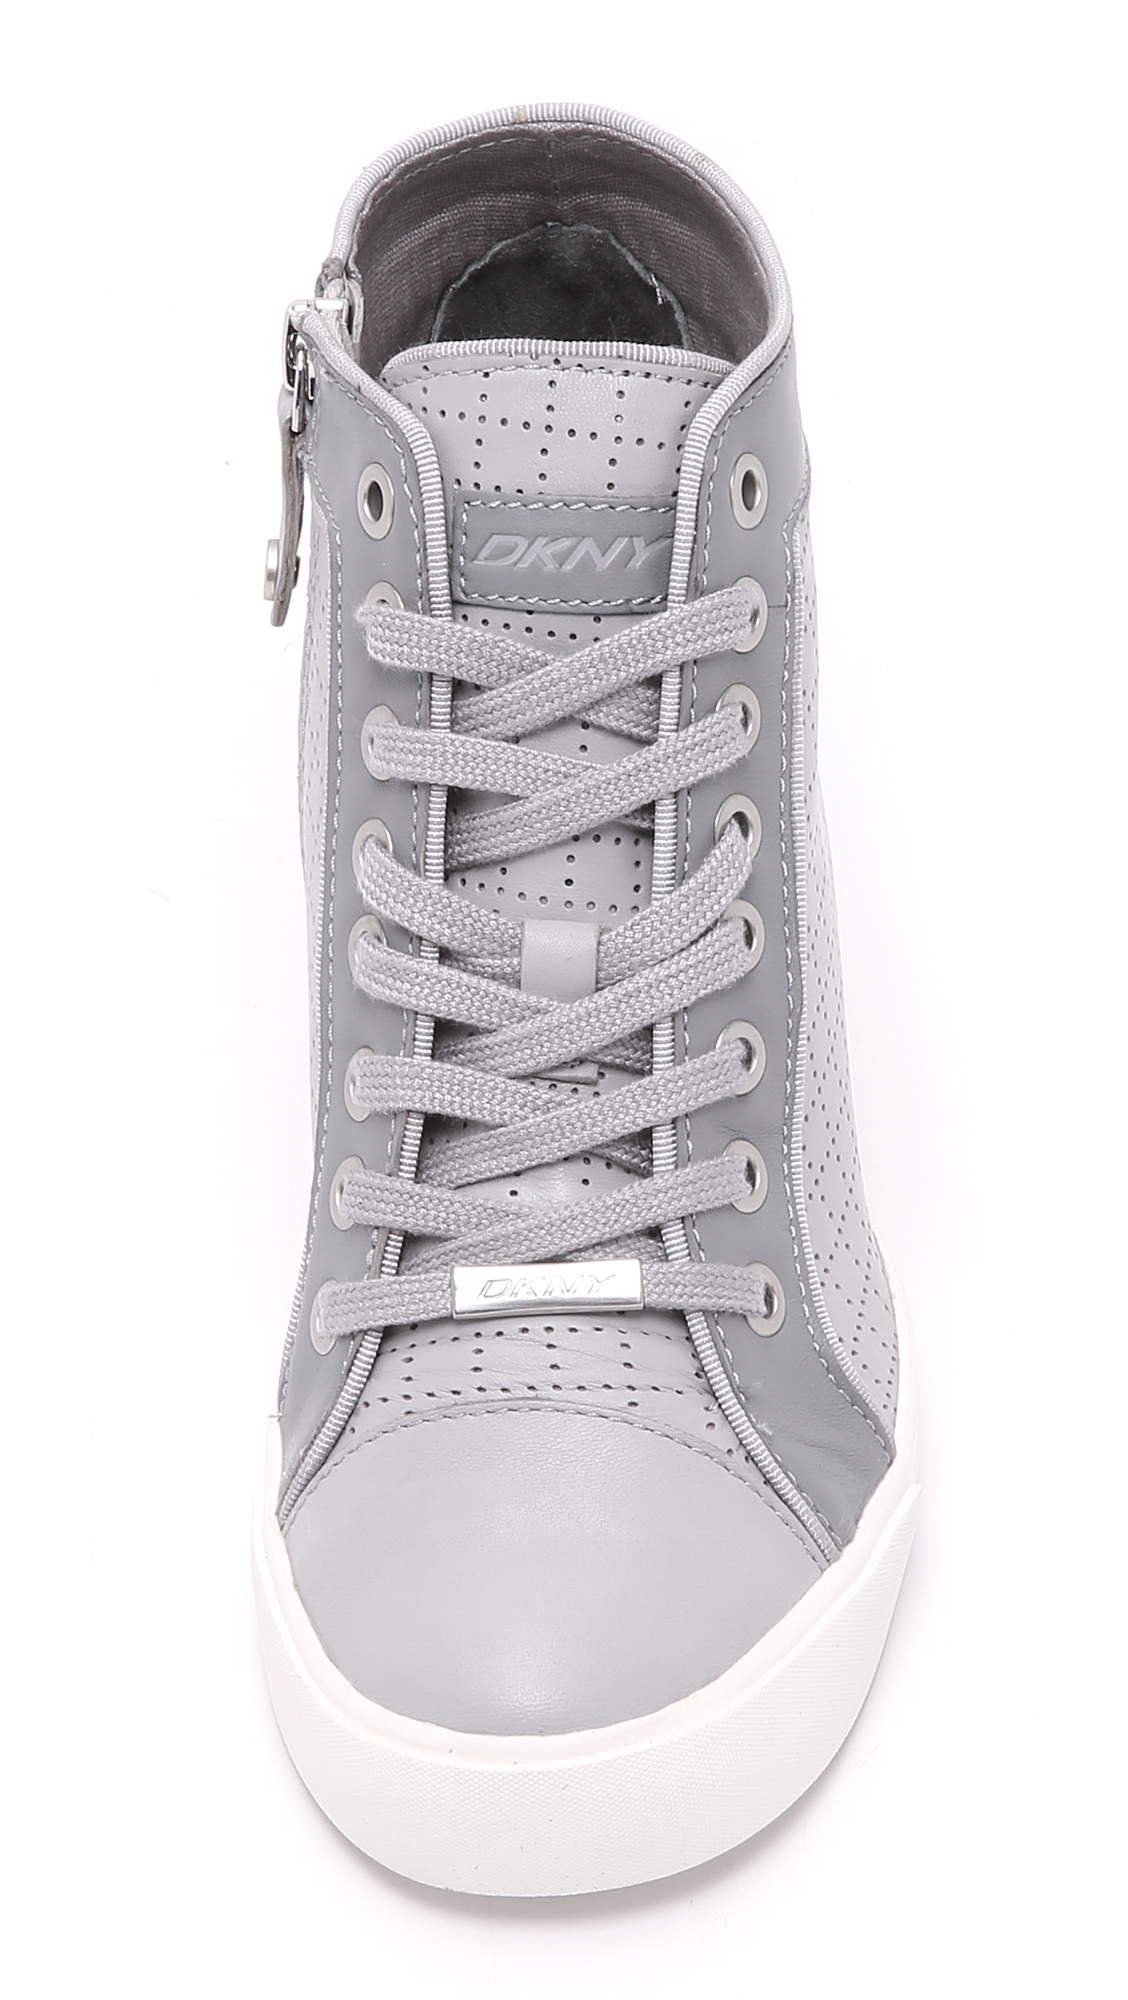 gray wedge tennis shoes